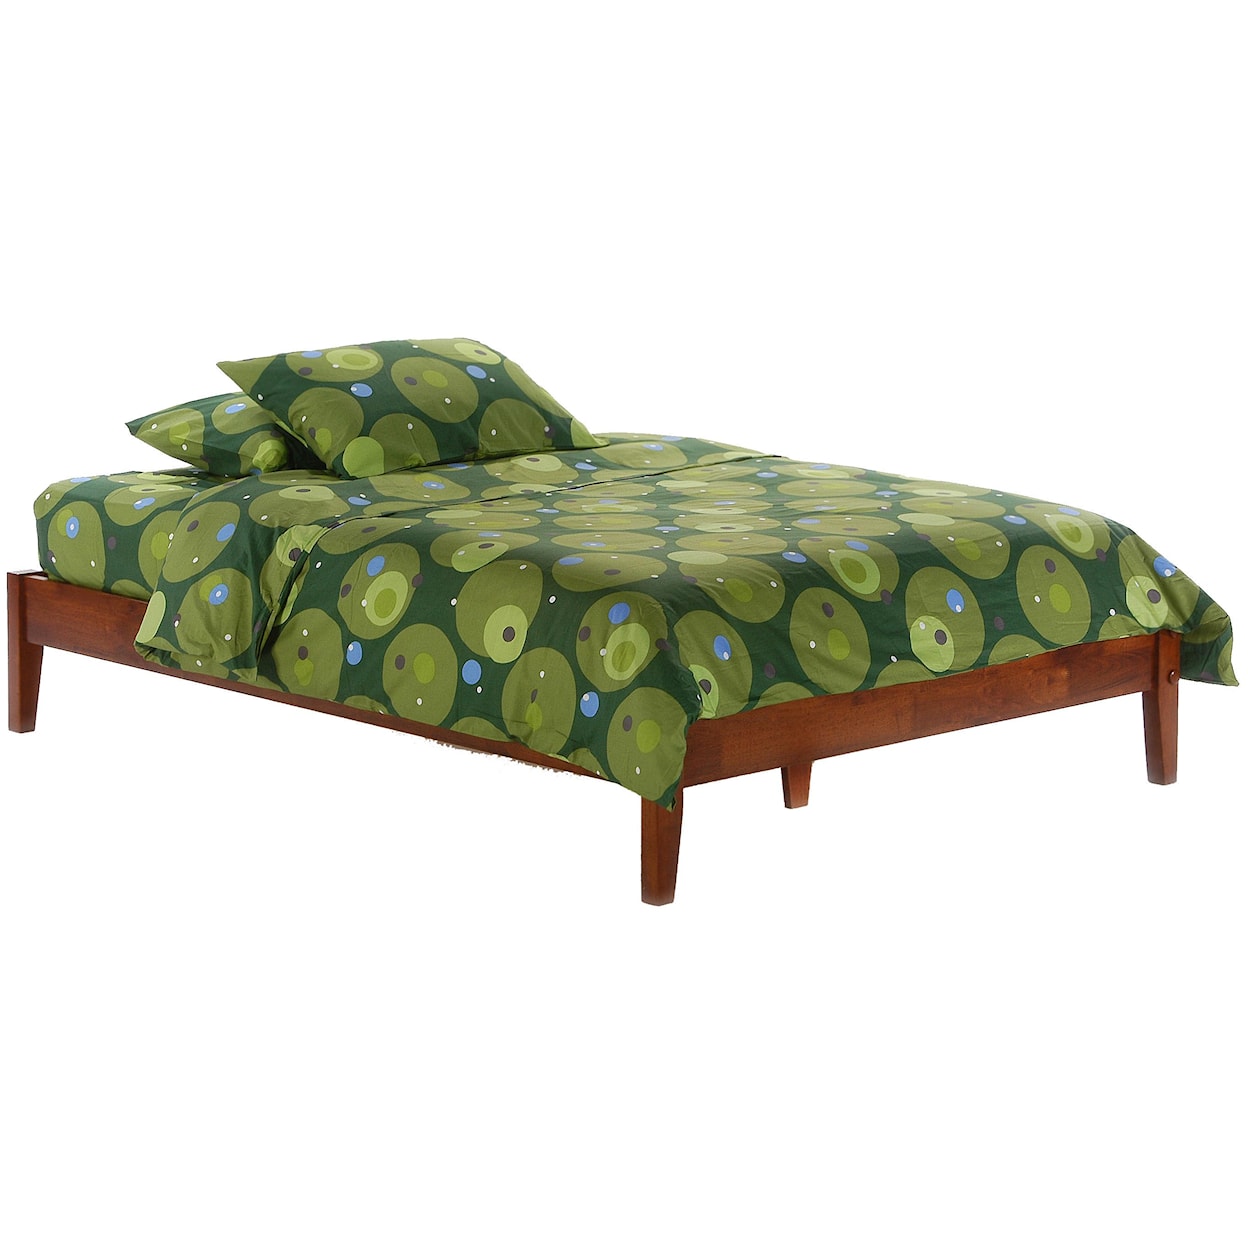 Night & Day Furniture Spice California King Bed